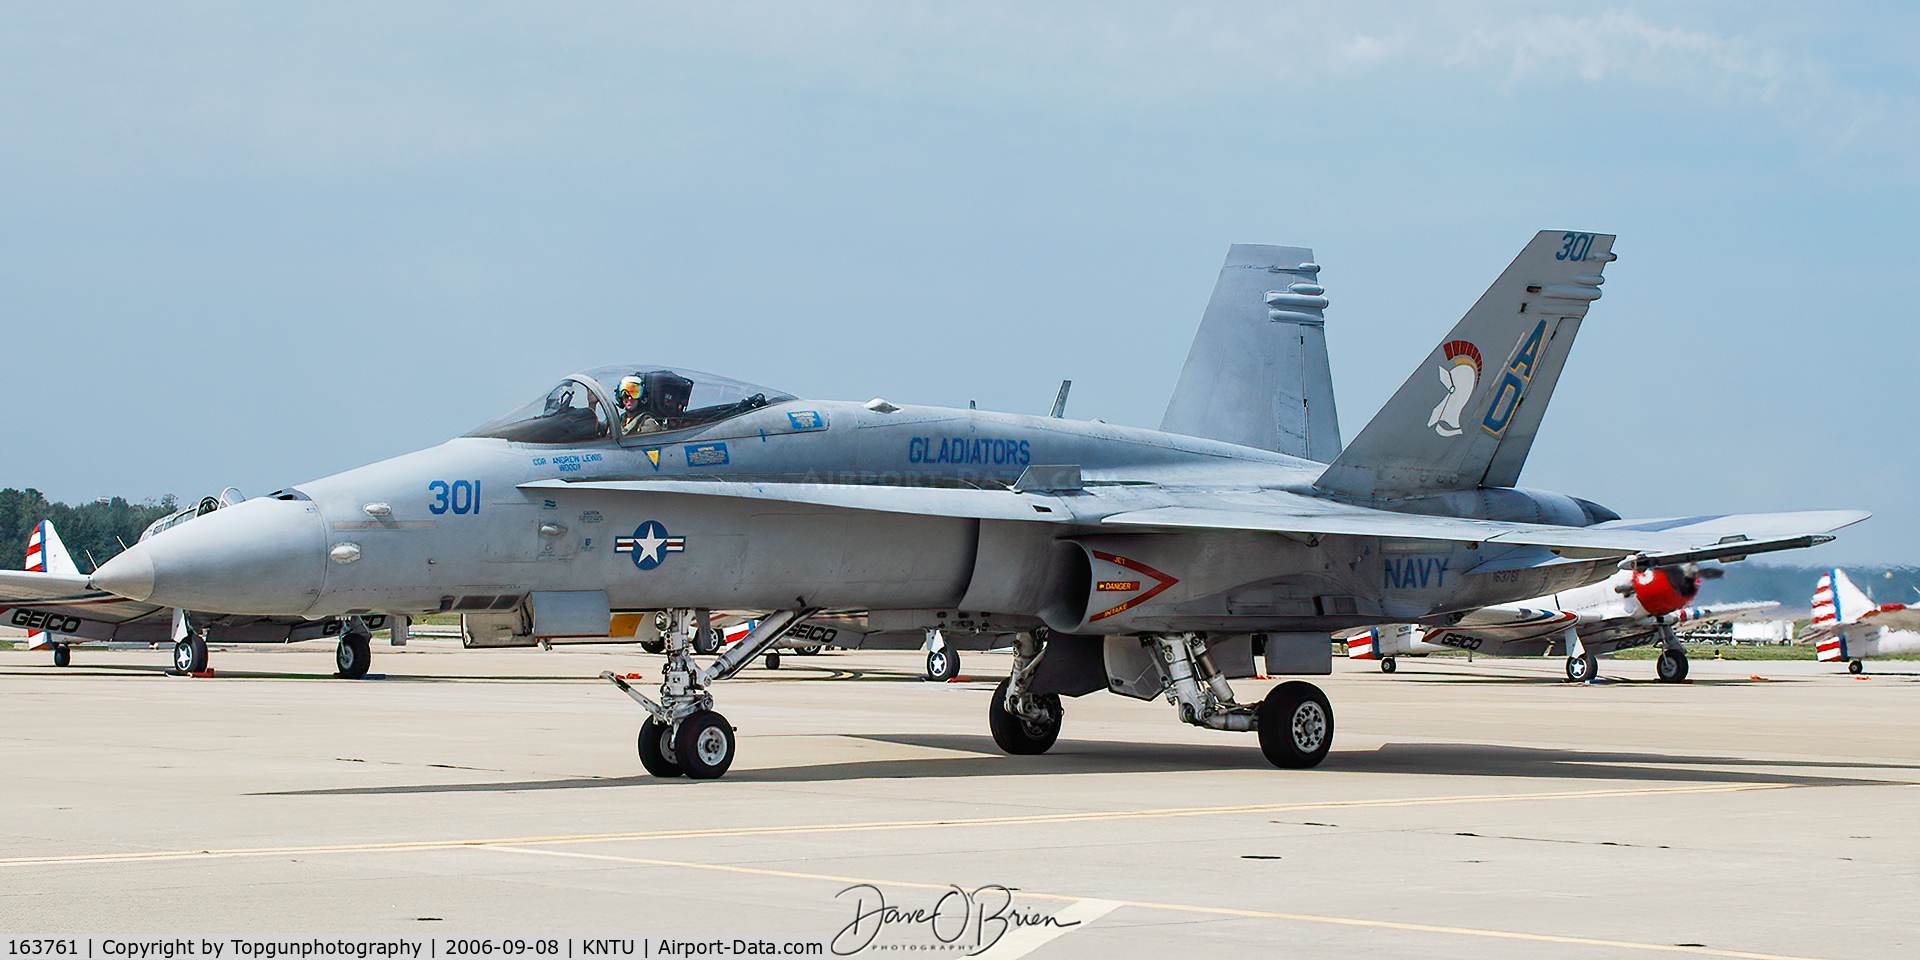 163761, 1989 McDonnell Douglas F/A-18C Hornet C/N 0839, Legacy Demo jet heading back to the ramp.